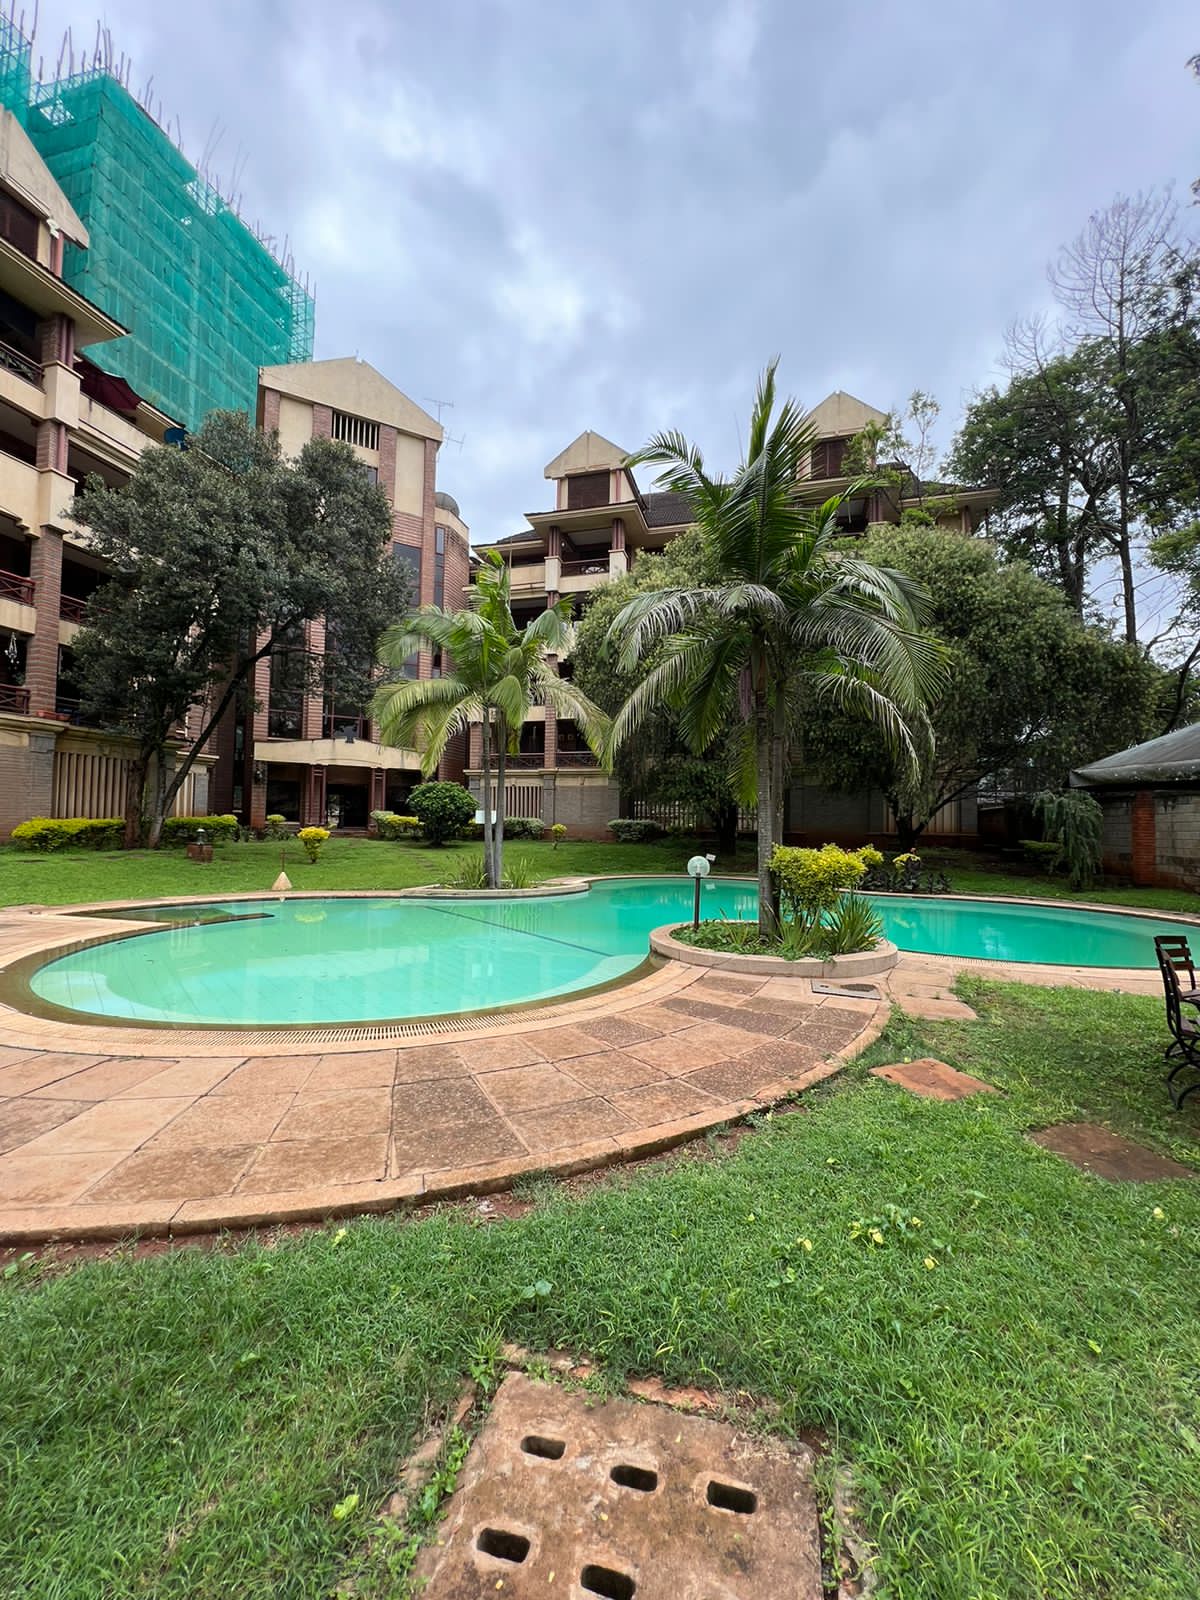 1 acre land for sale near yaya center in Kilimani, Nairobi. With old apartments for residential. Ideal for high rise apartments. 360Million Musilli Homes